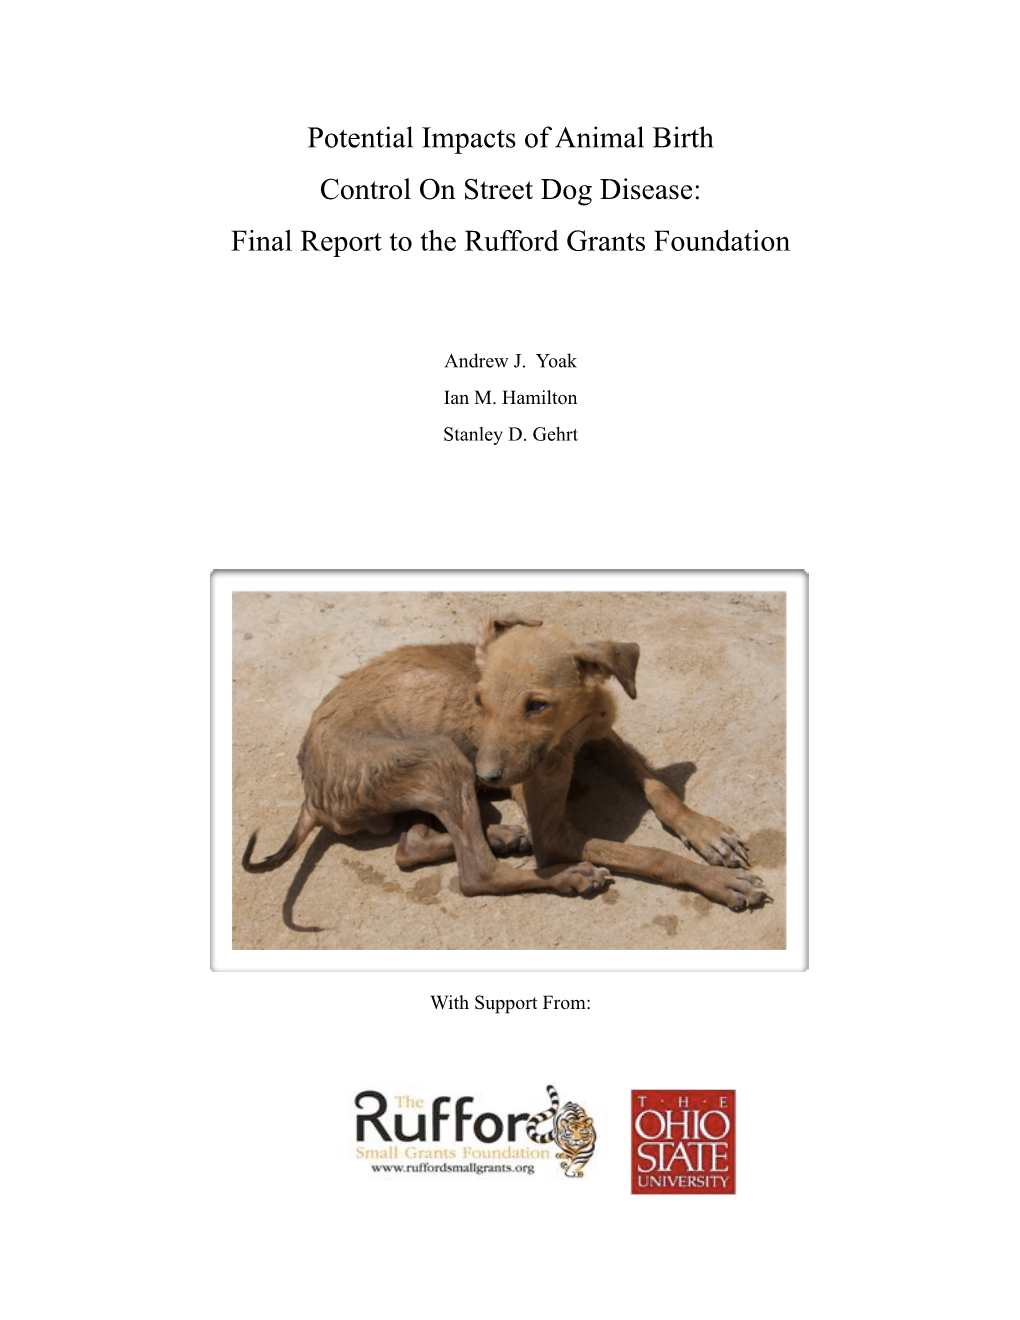 Potential Impacts of Animal Birth Control on Street Dog Disease: Final Report to the Rufford Grants Foundation